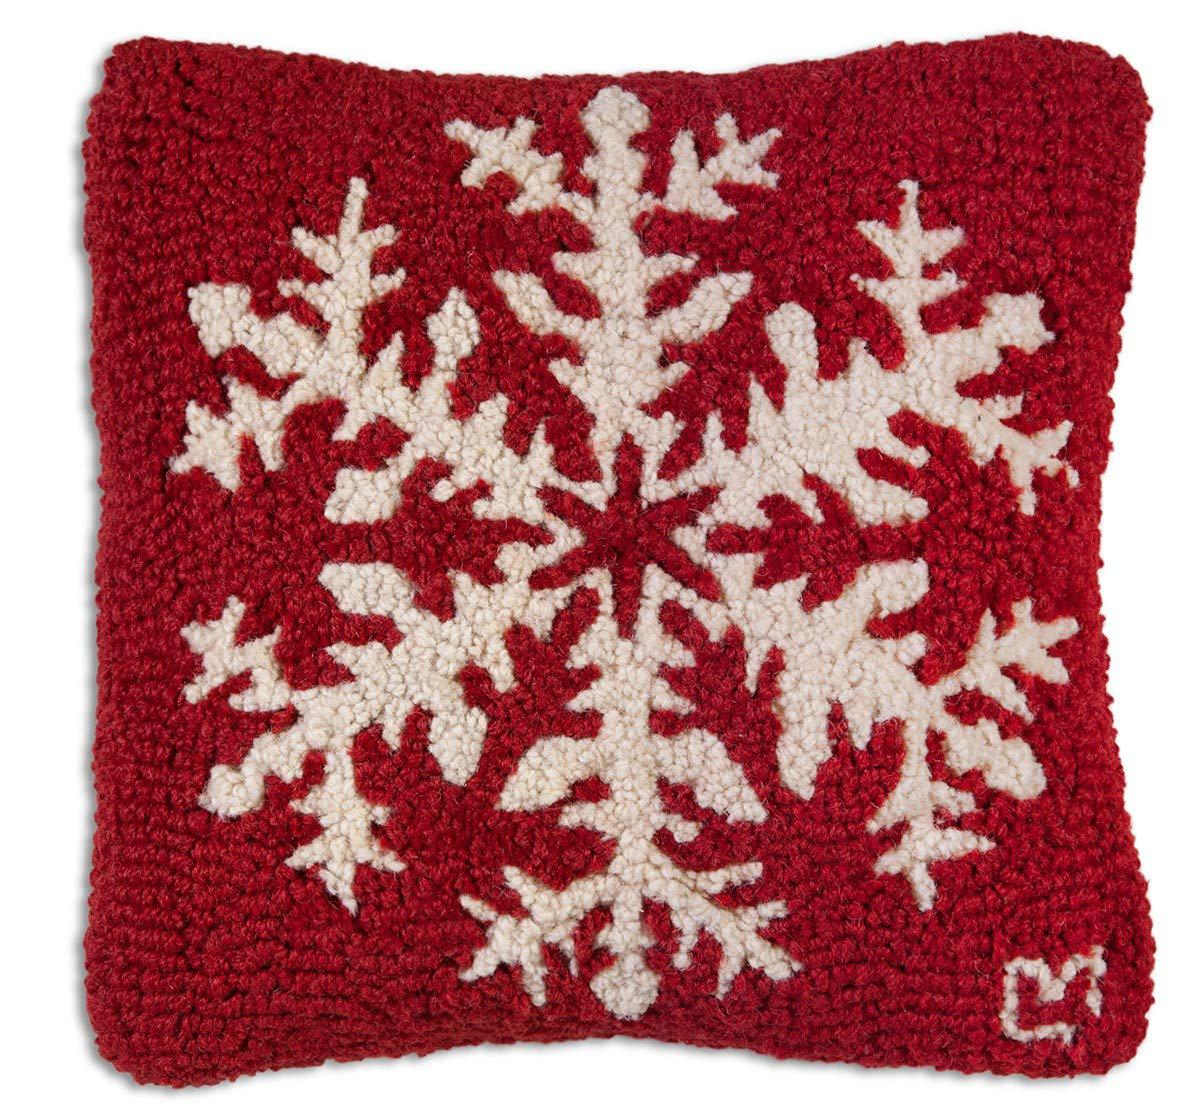 chandler 4 corners artist-designed red snowflake hand-hooked wool decorative christmas throw pillow (14 x 14) christmas pillo